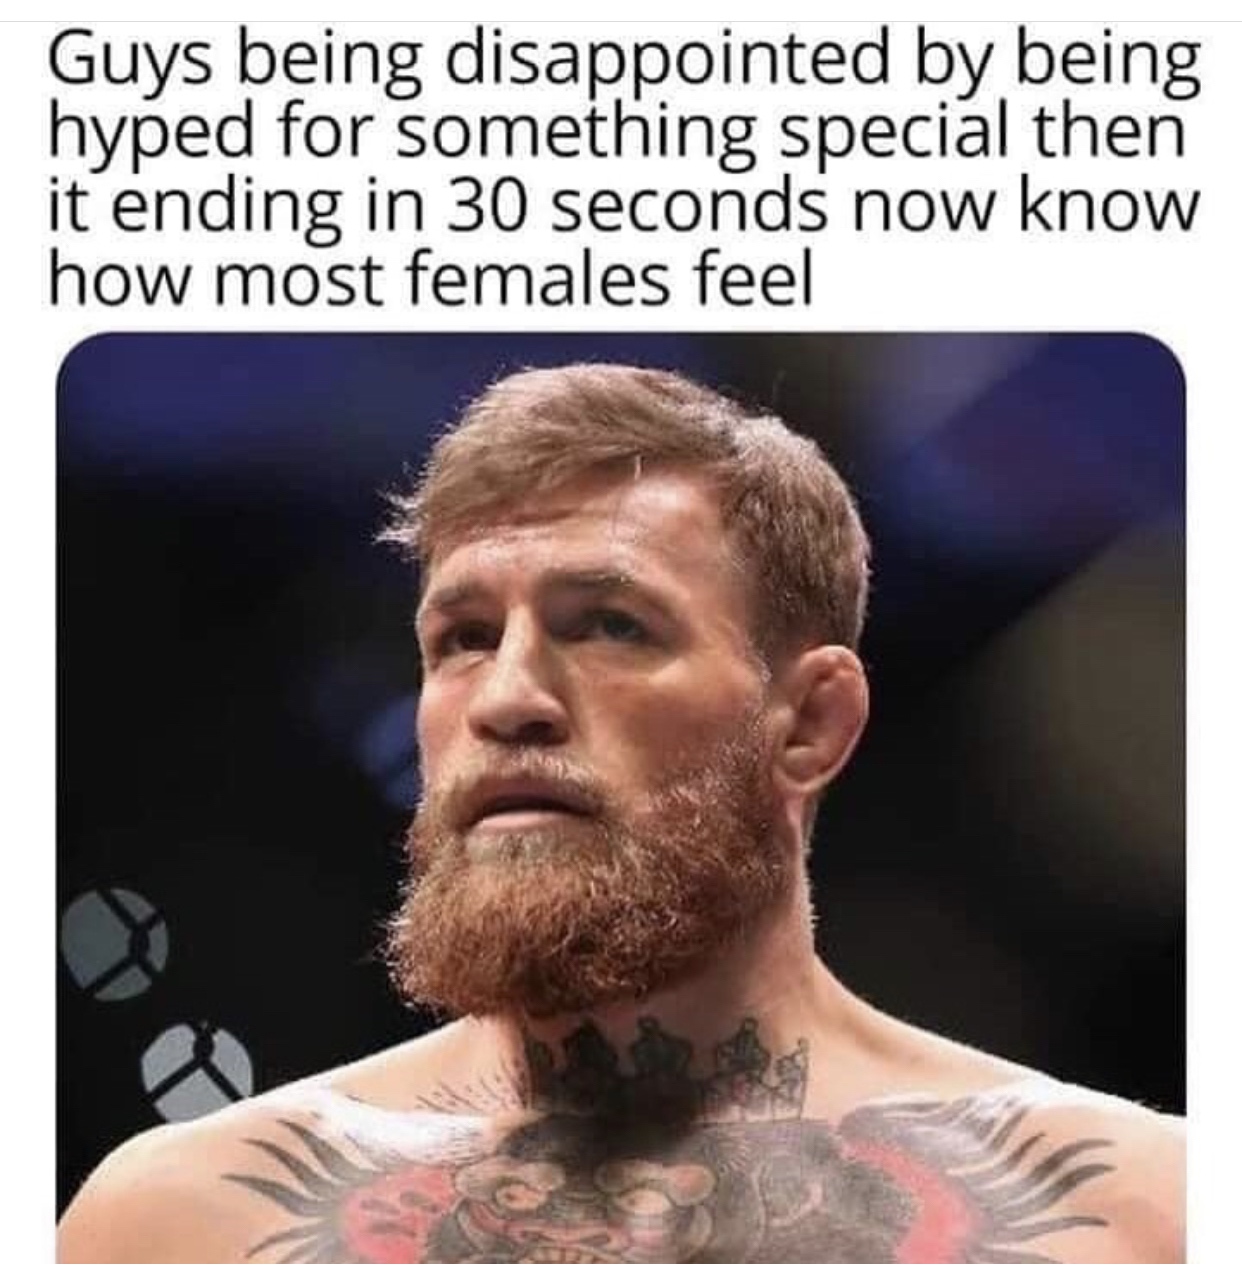 conor mcgregor - Guys being disappointed by being hyped for something special then it ending in 30 seconds now know how most females feel